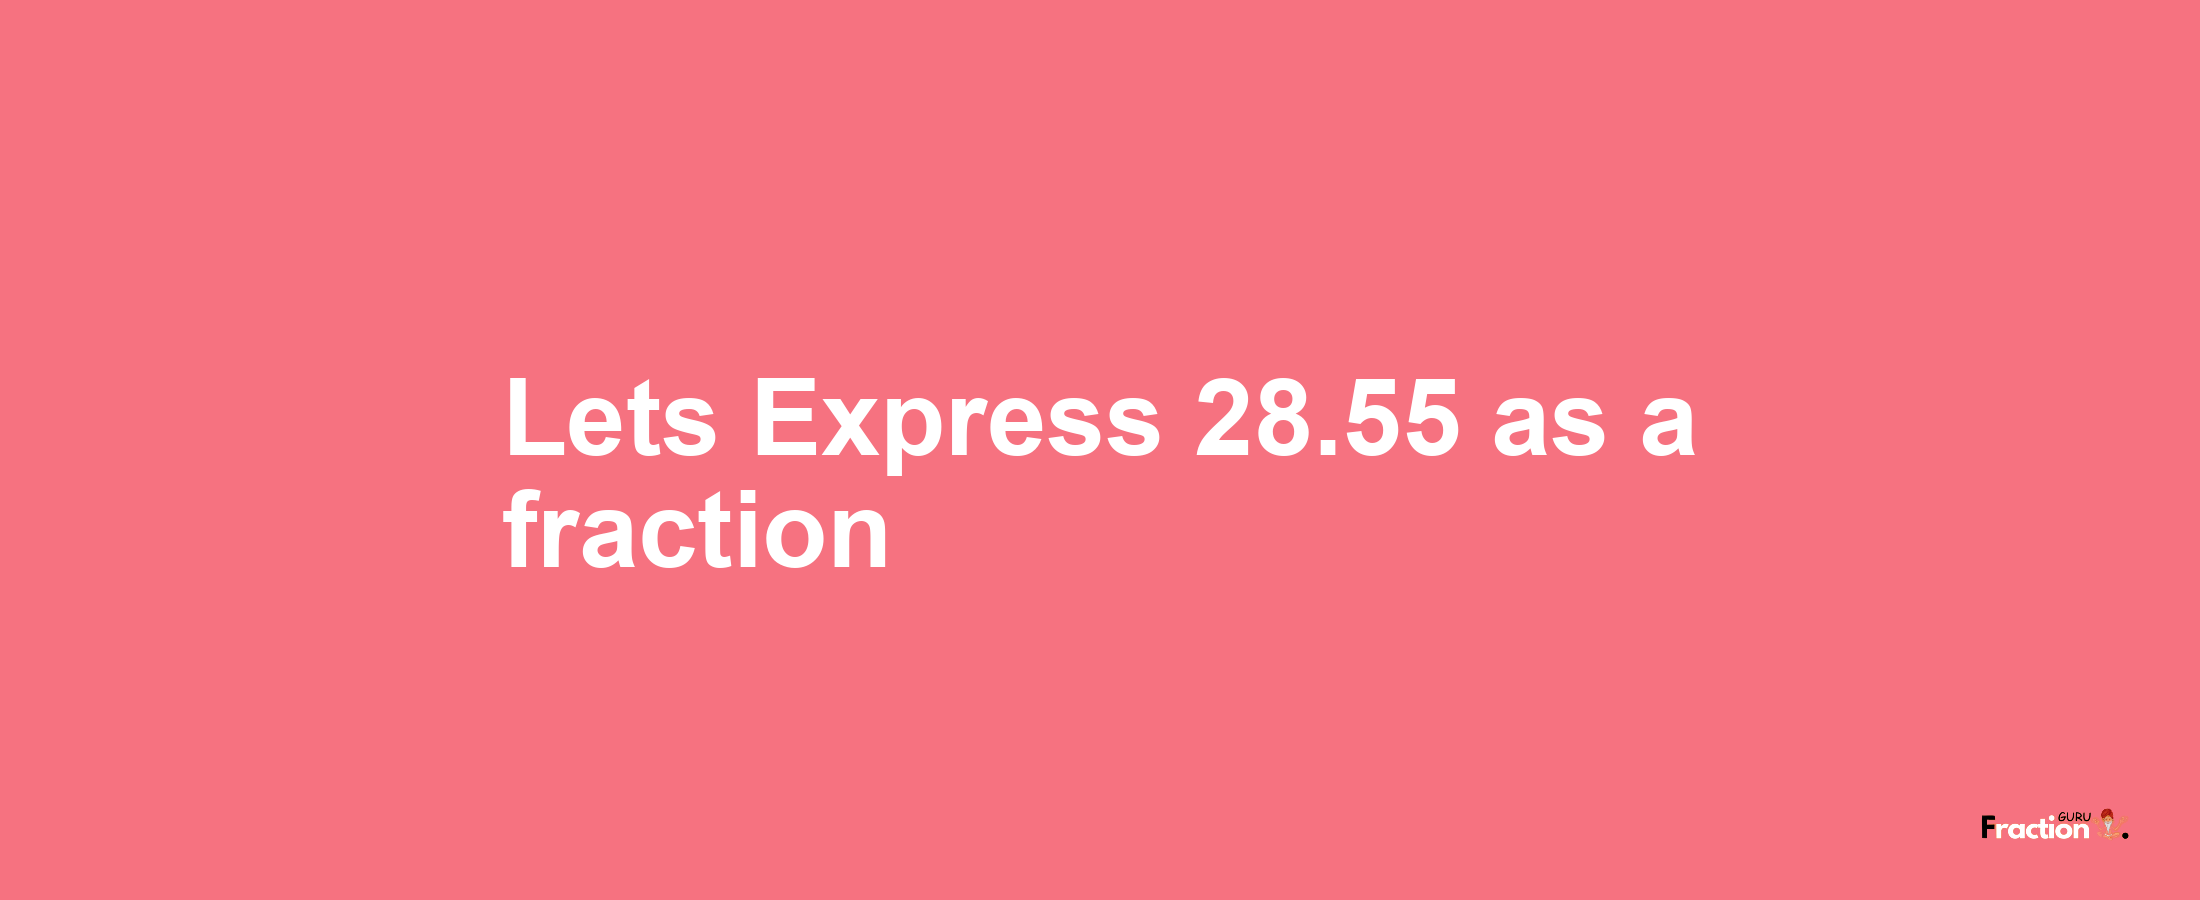 Lets Express 28.55 as afraction